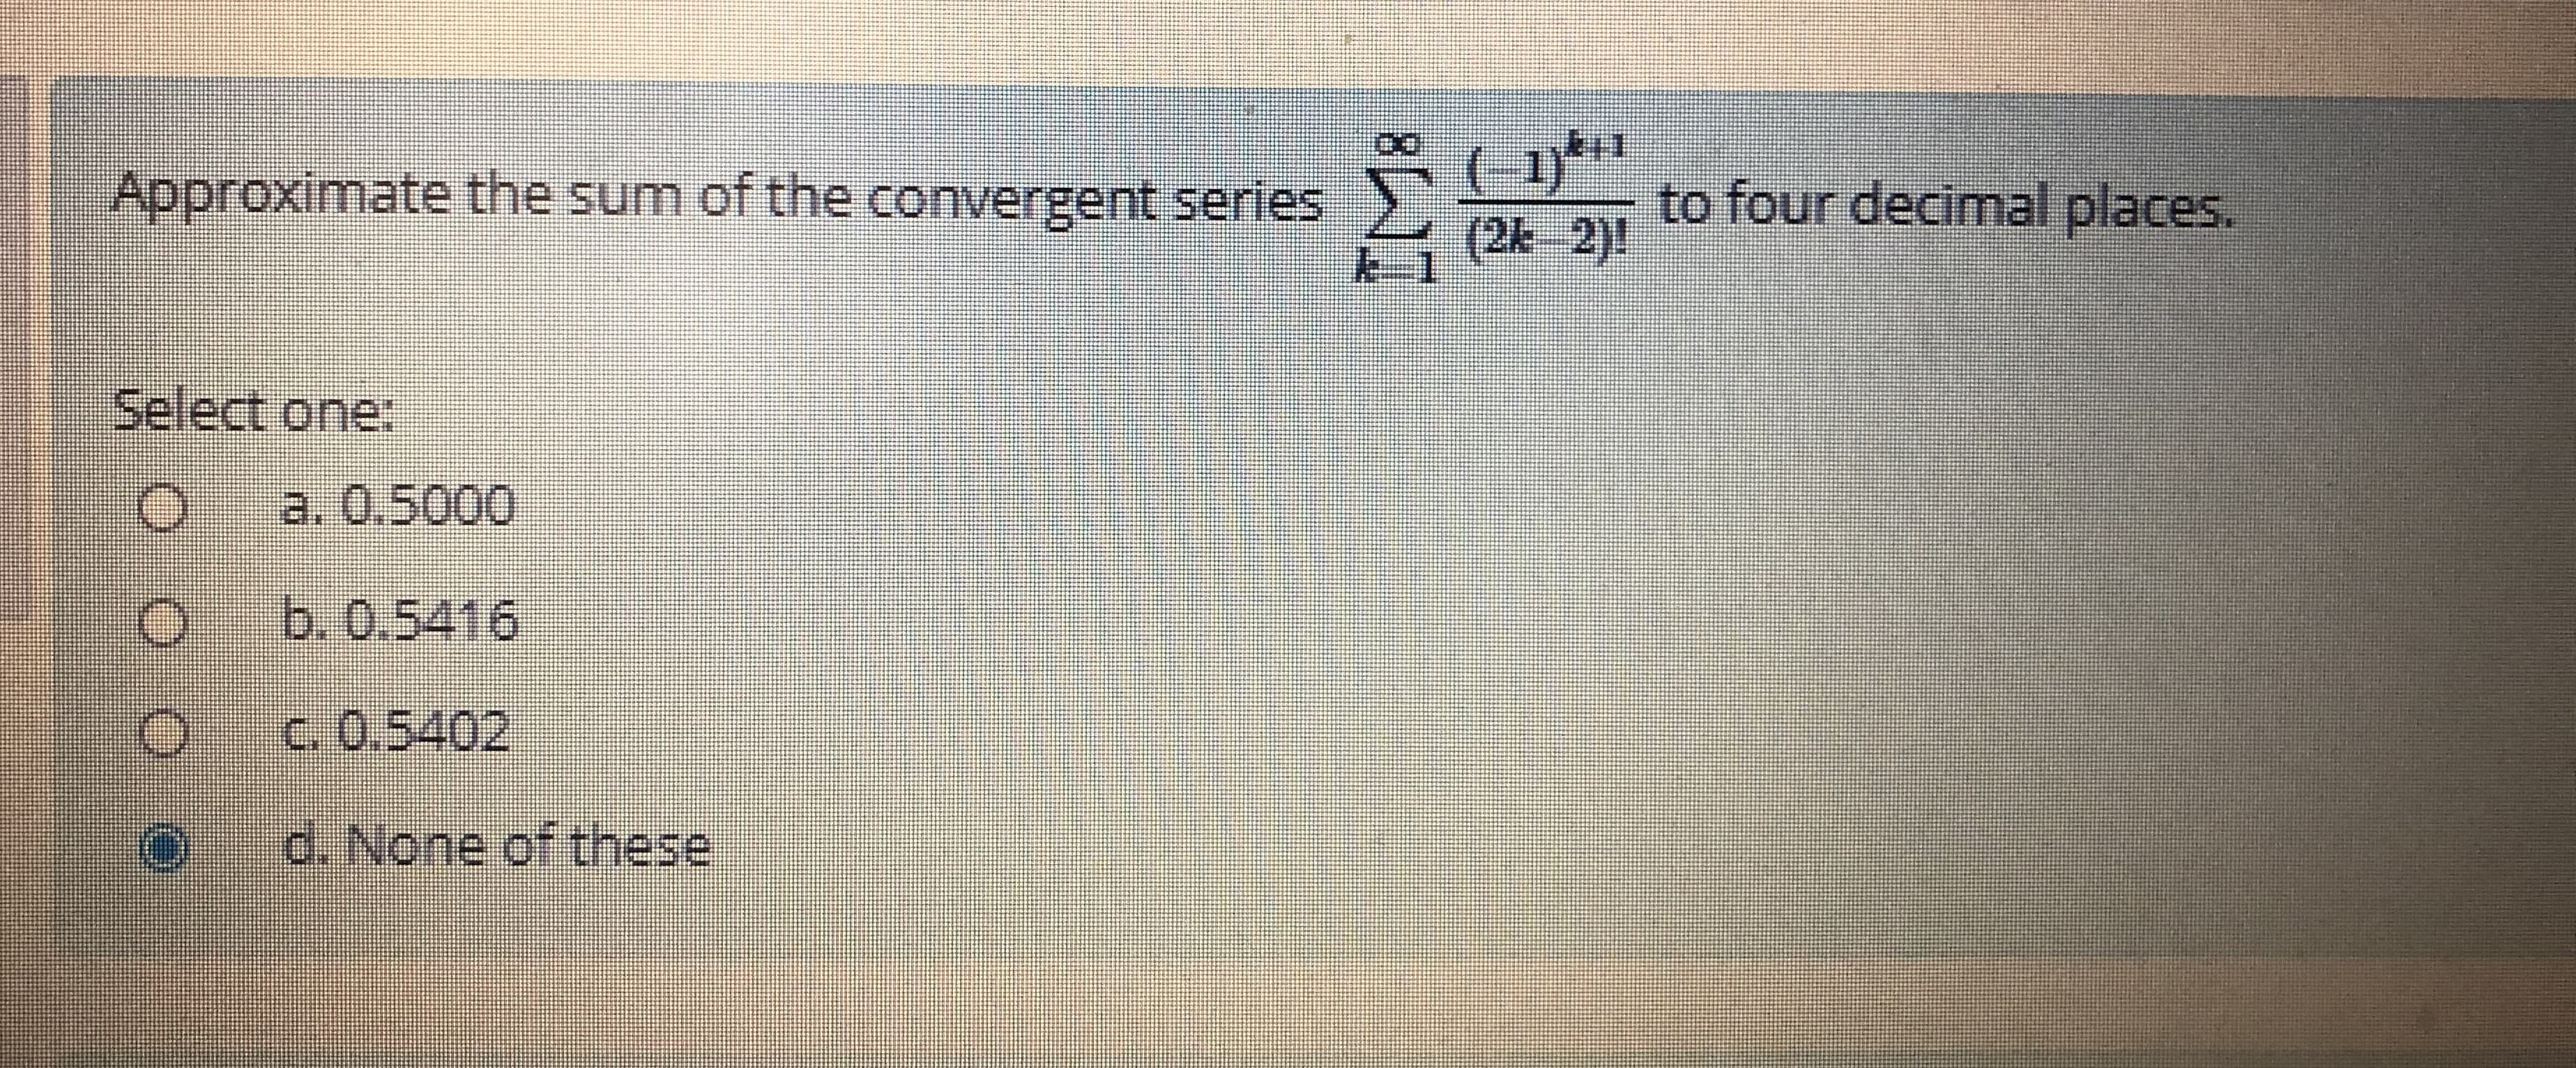 ( 1)**
Approximate the sum of the convergent series
to four decimal places.
